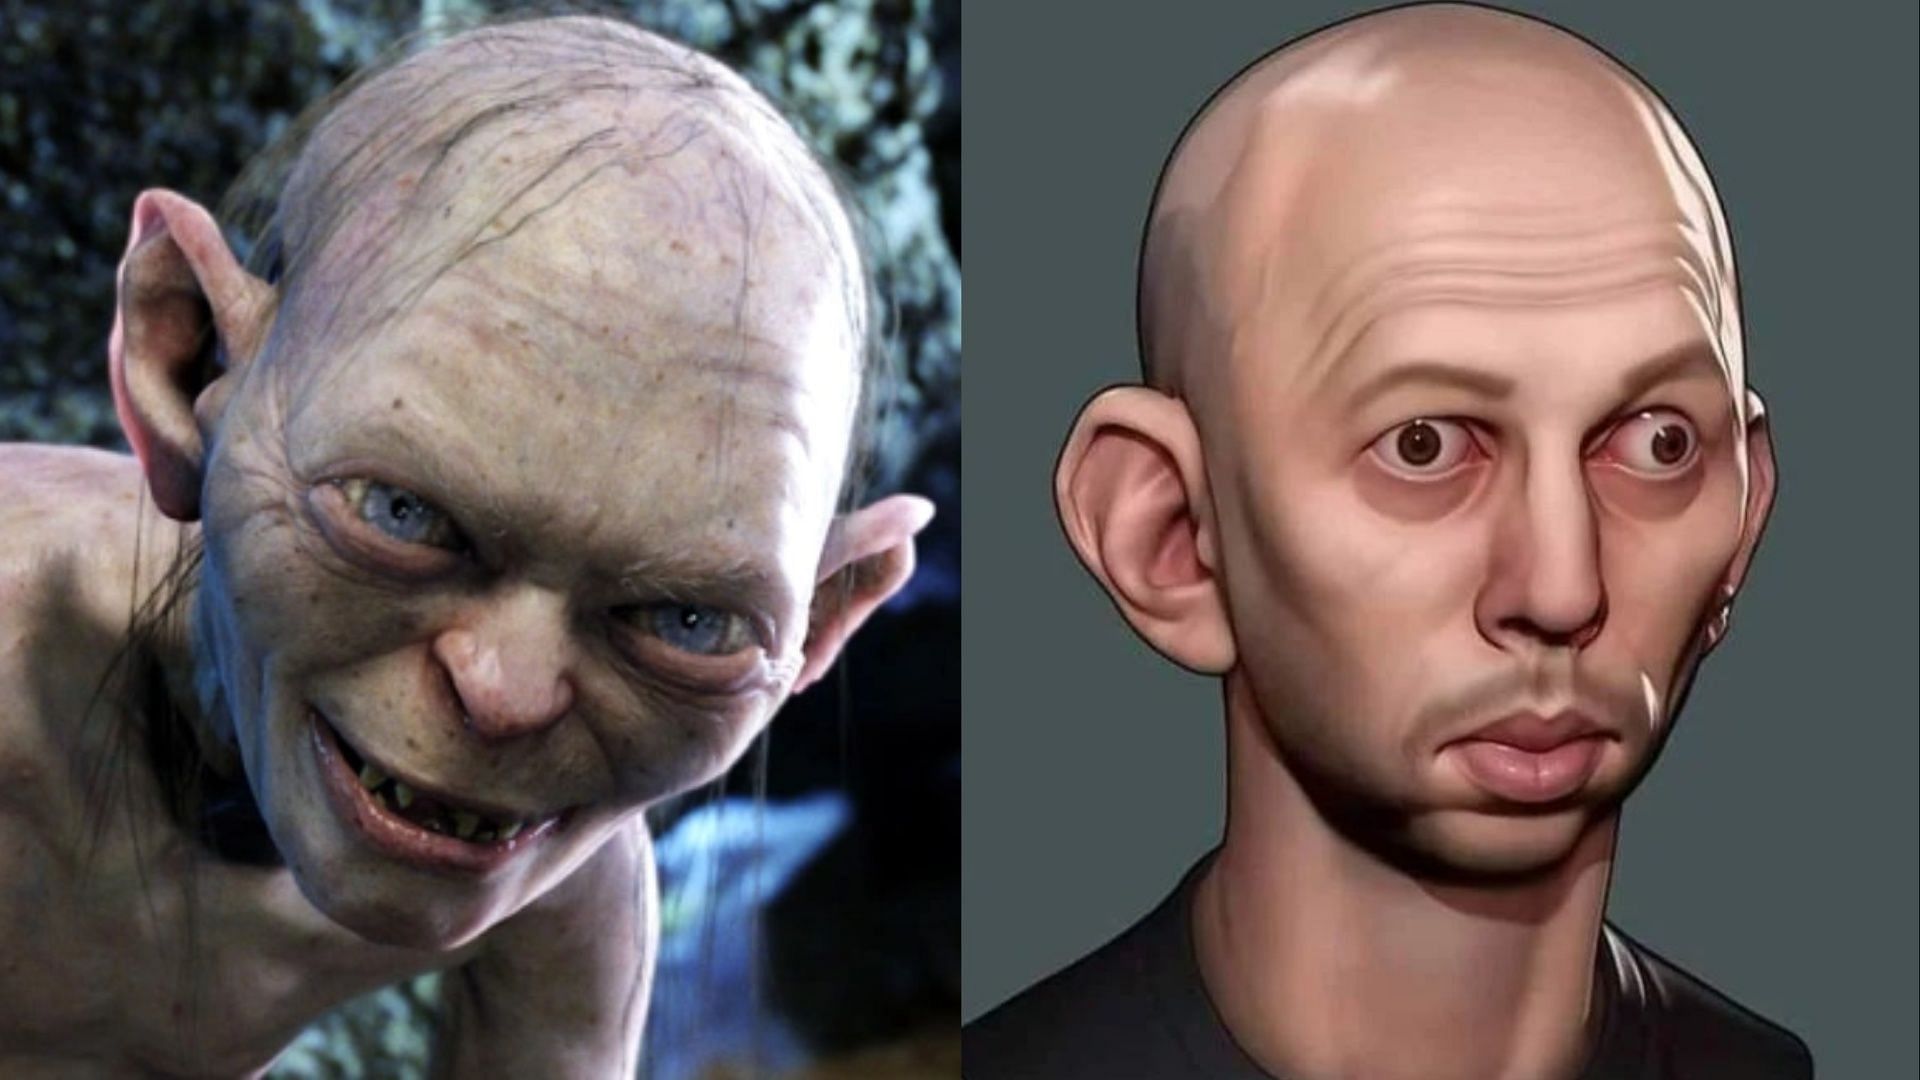 Gollum, The Lord of the Rings Minecraft Mod Wiki